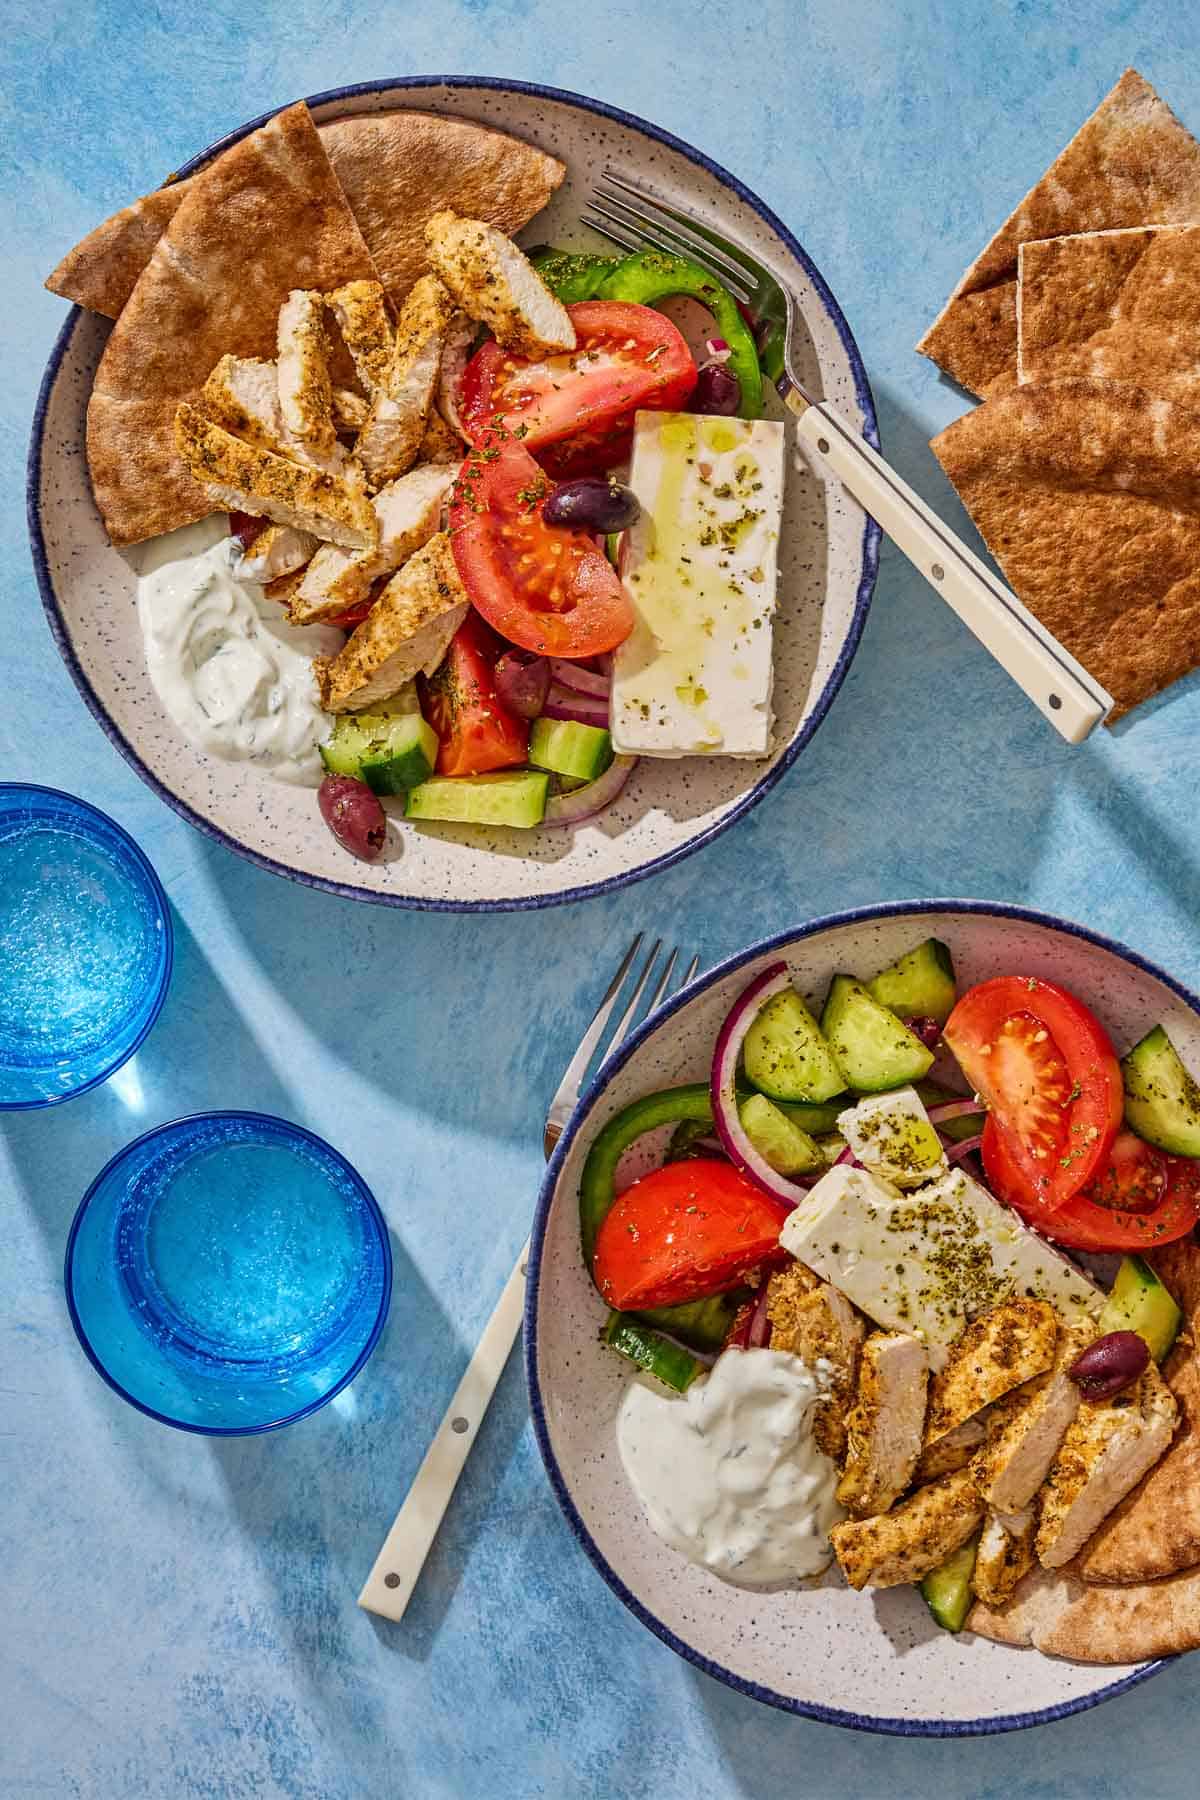 An overhead photo of 2 gyro bowls with forks. Next to these are 2 glasses of water and pieces of pita bread.